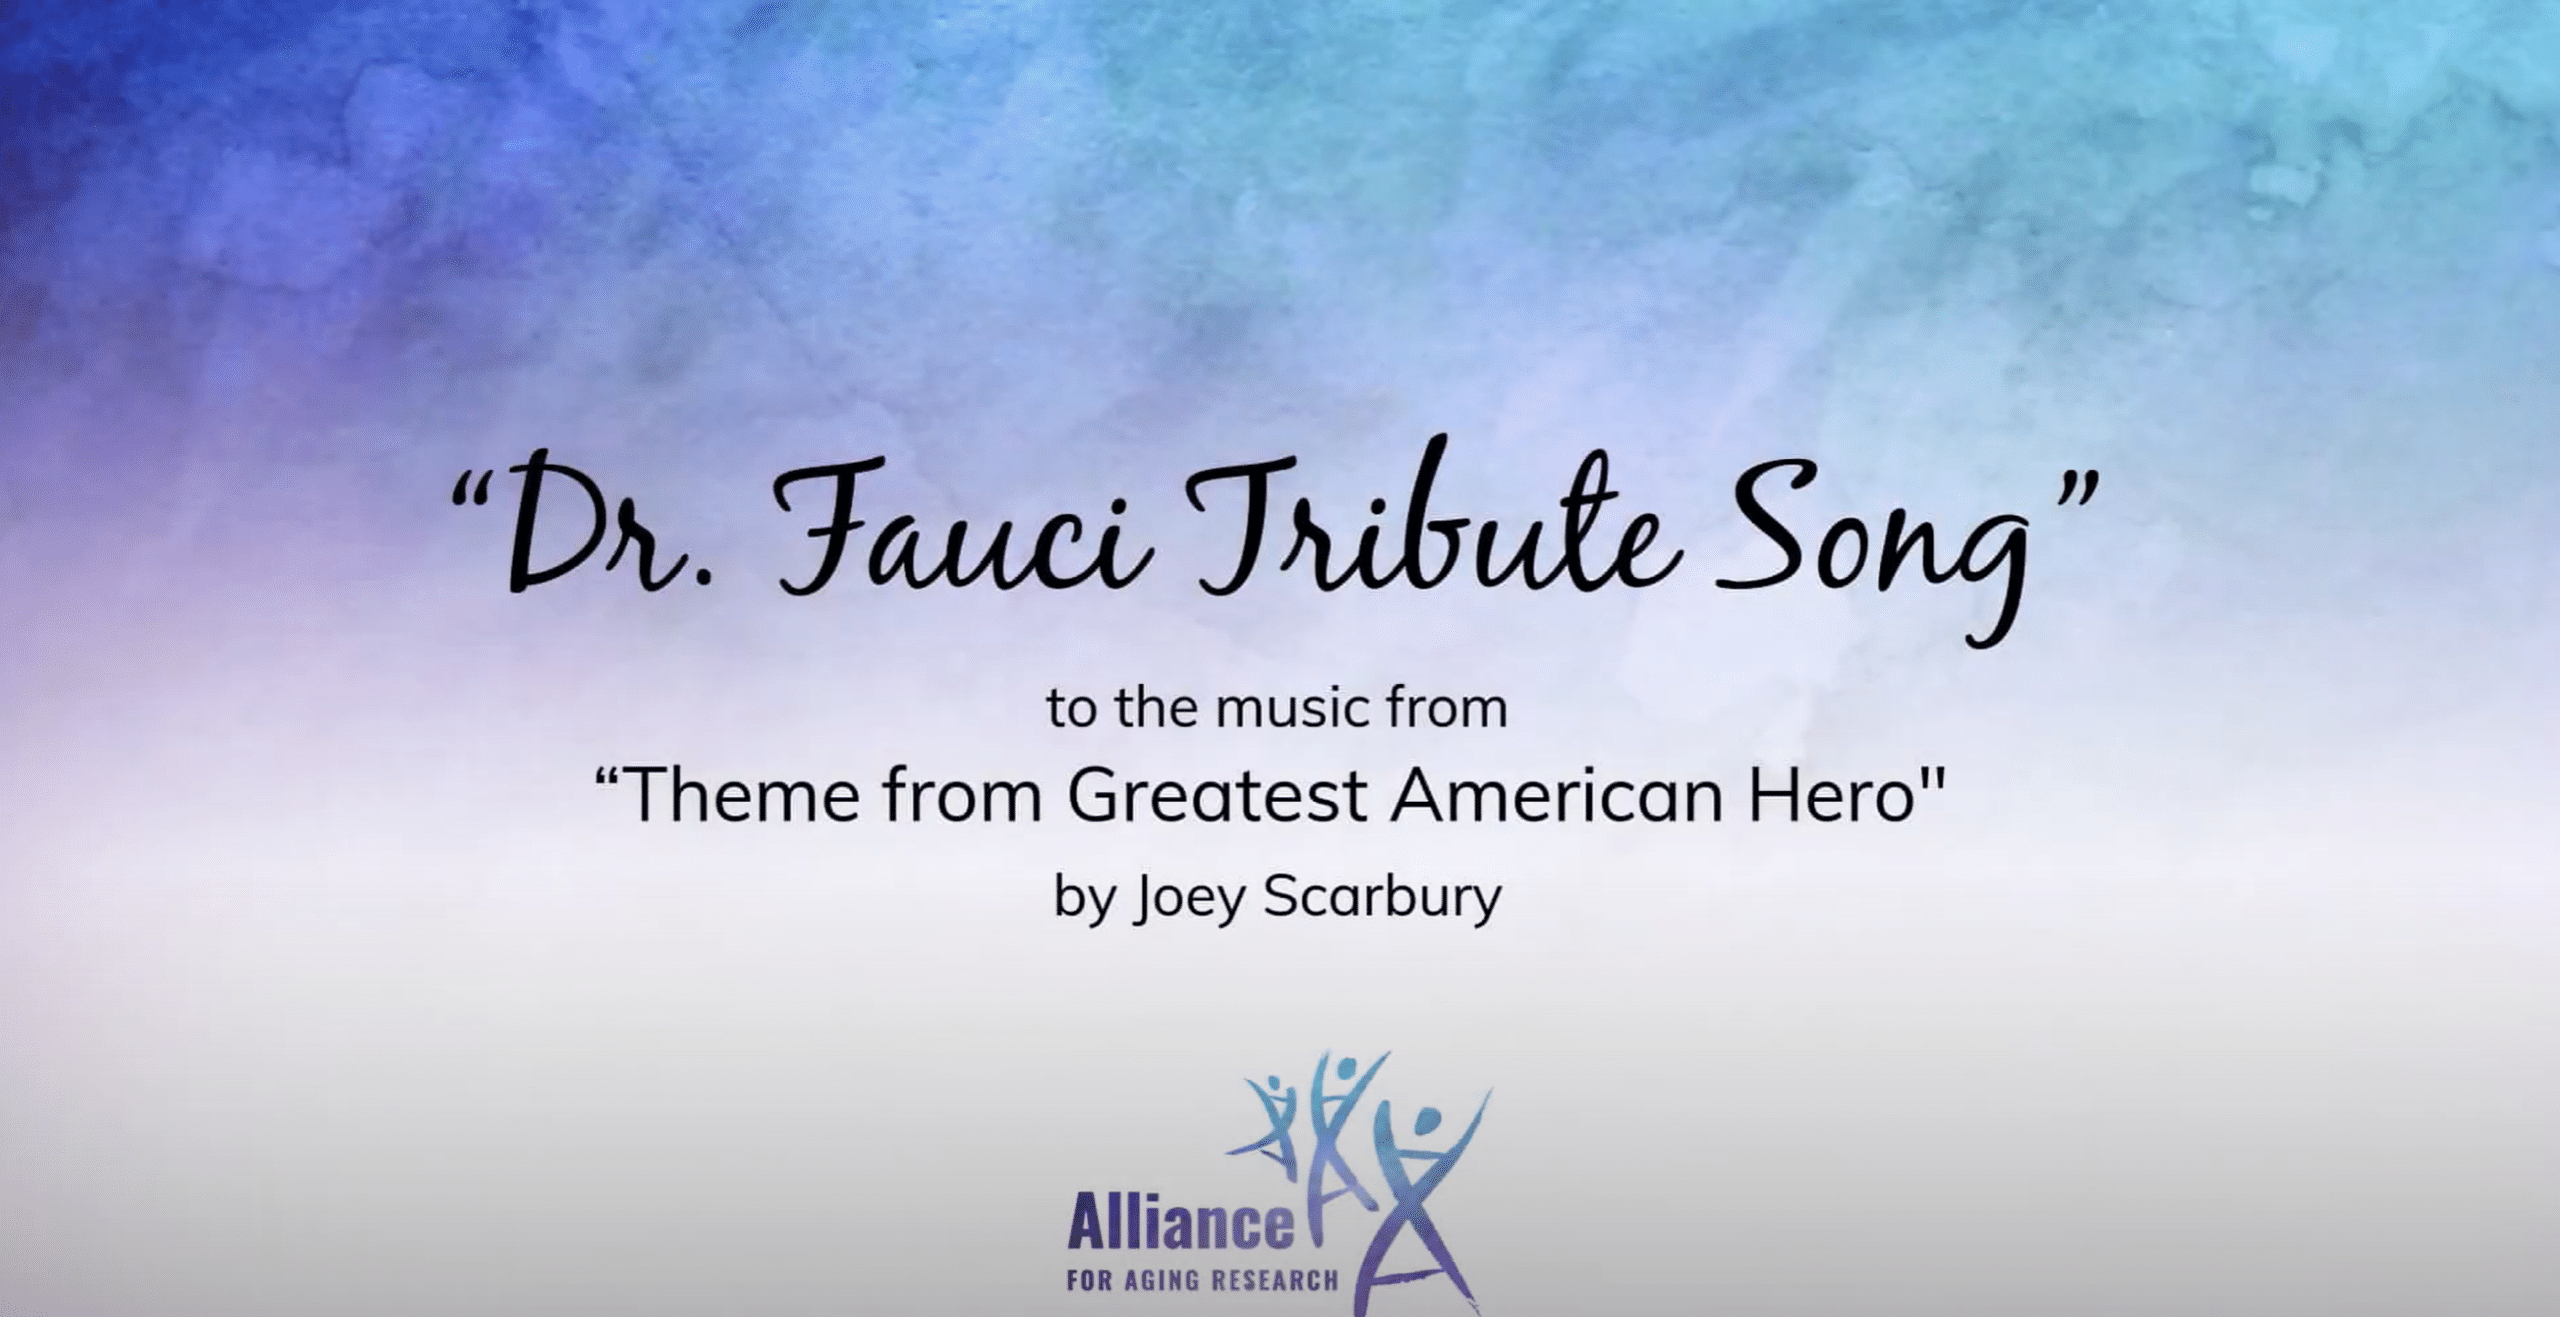 Title slide for Dr Fauci Tribute Song for Alliance 2020 event.